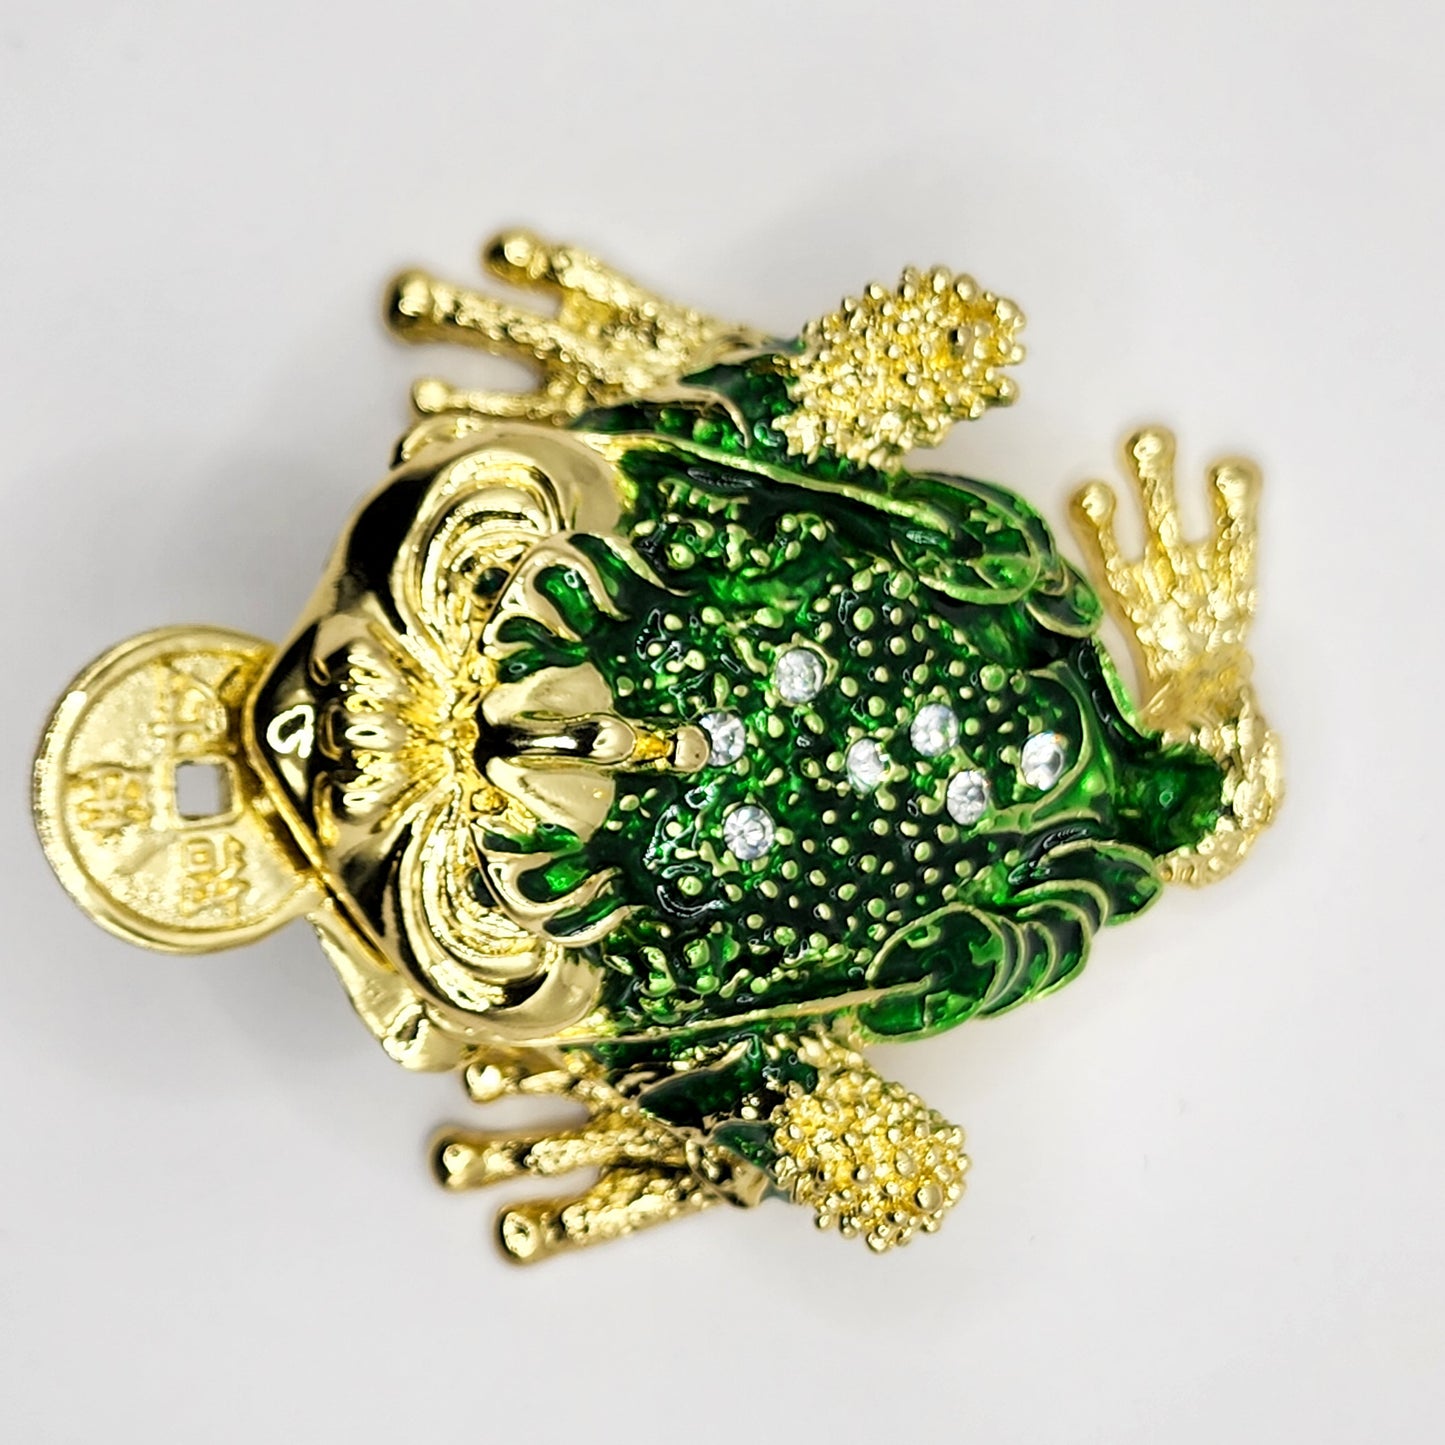 Metallic Money Frog Décor Container for Jewelry & Small Items